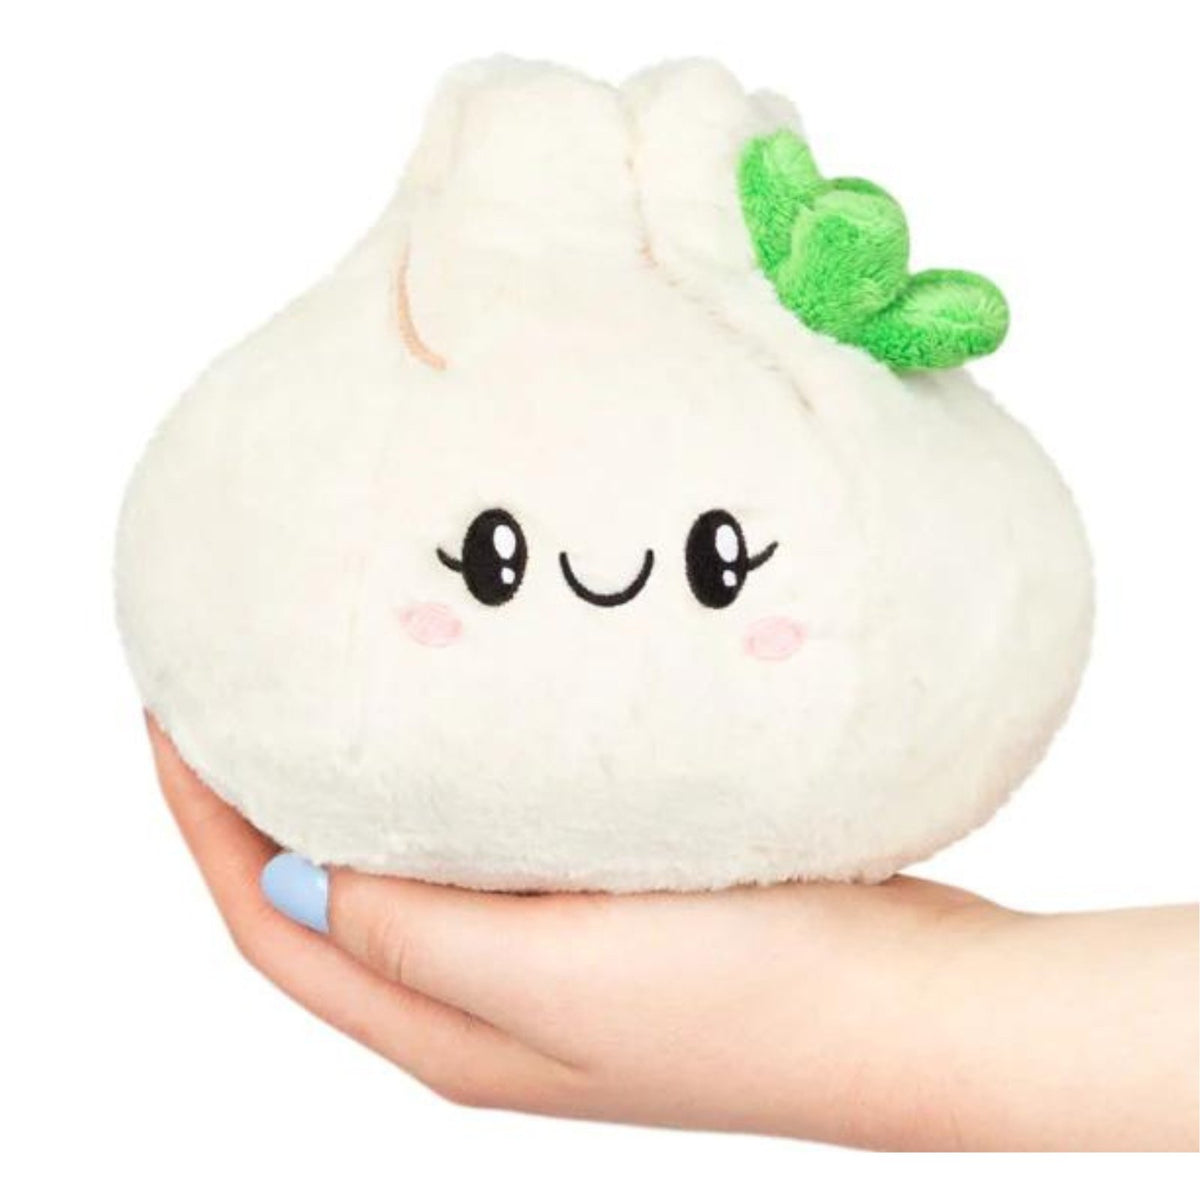 Emotional Support Dumplings - Soft Food Plushies by What Do You